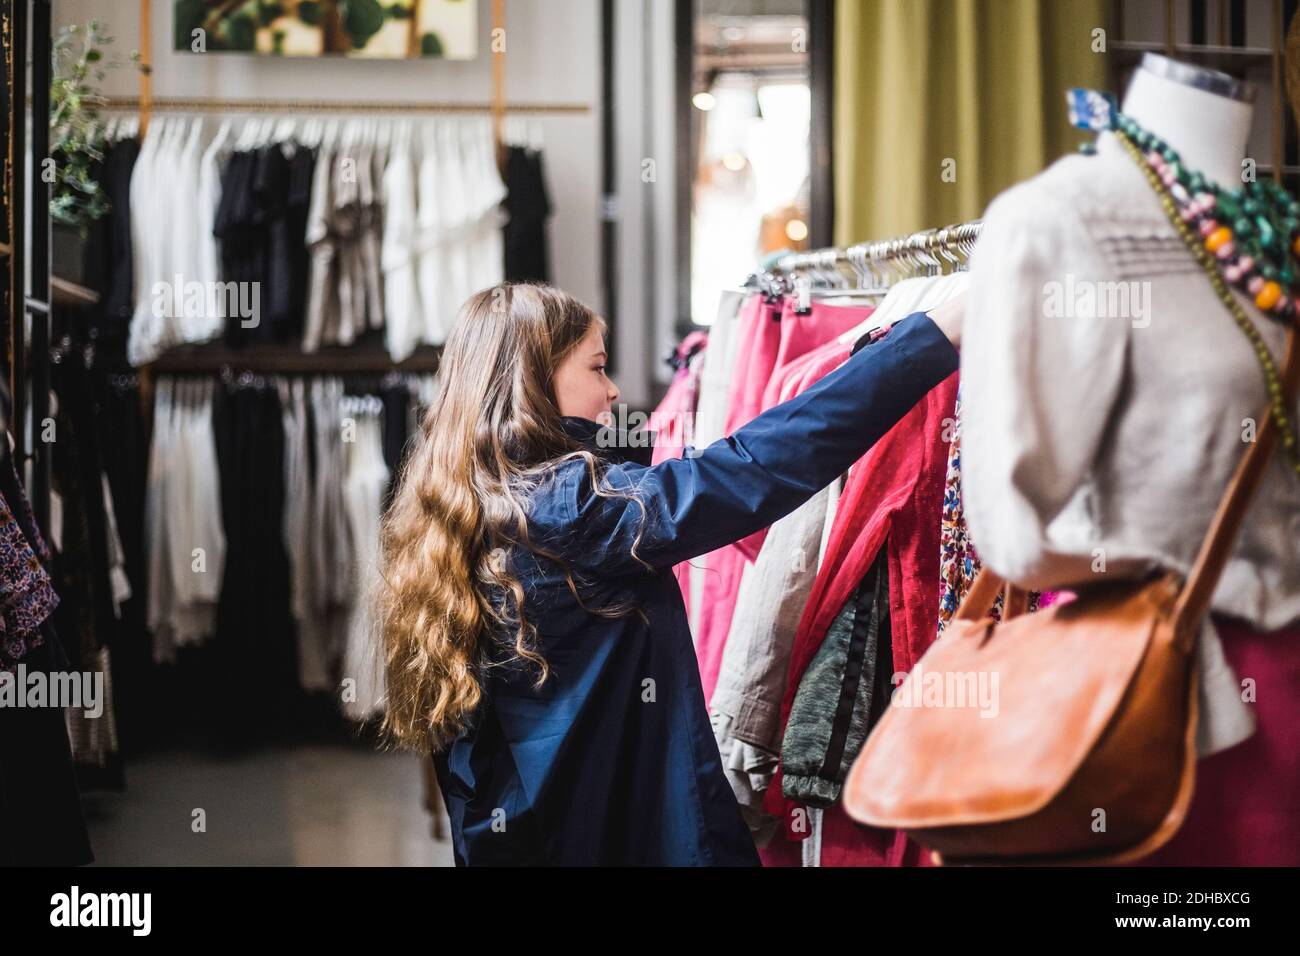 Side view of girl shopping in clothing store Stock Photo